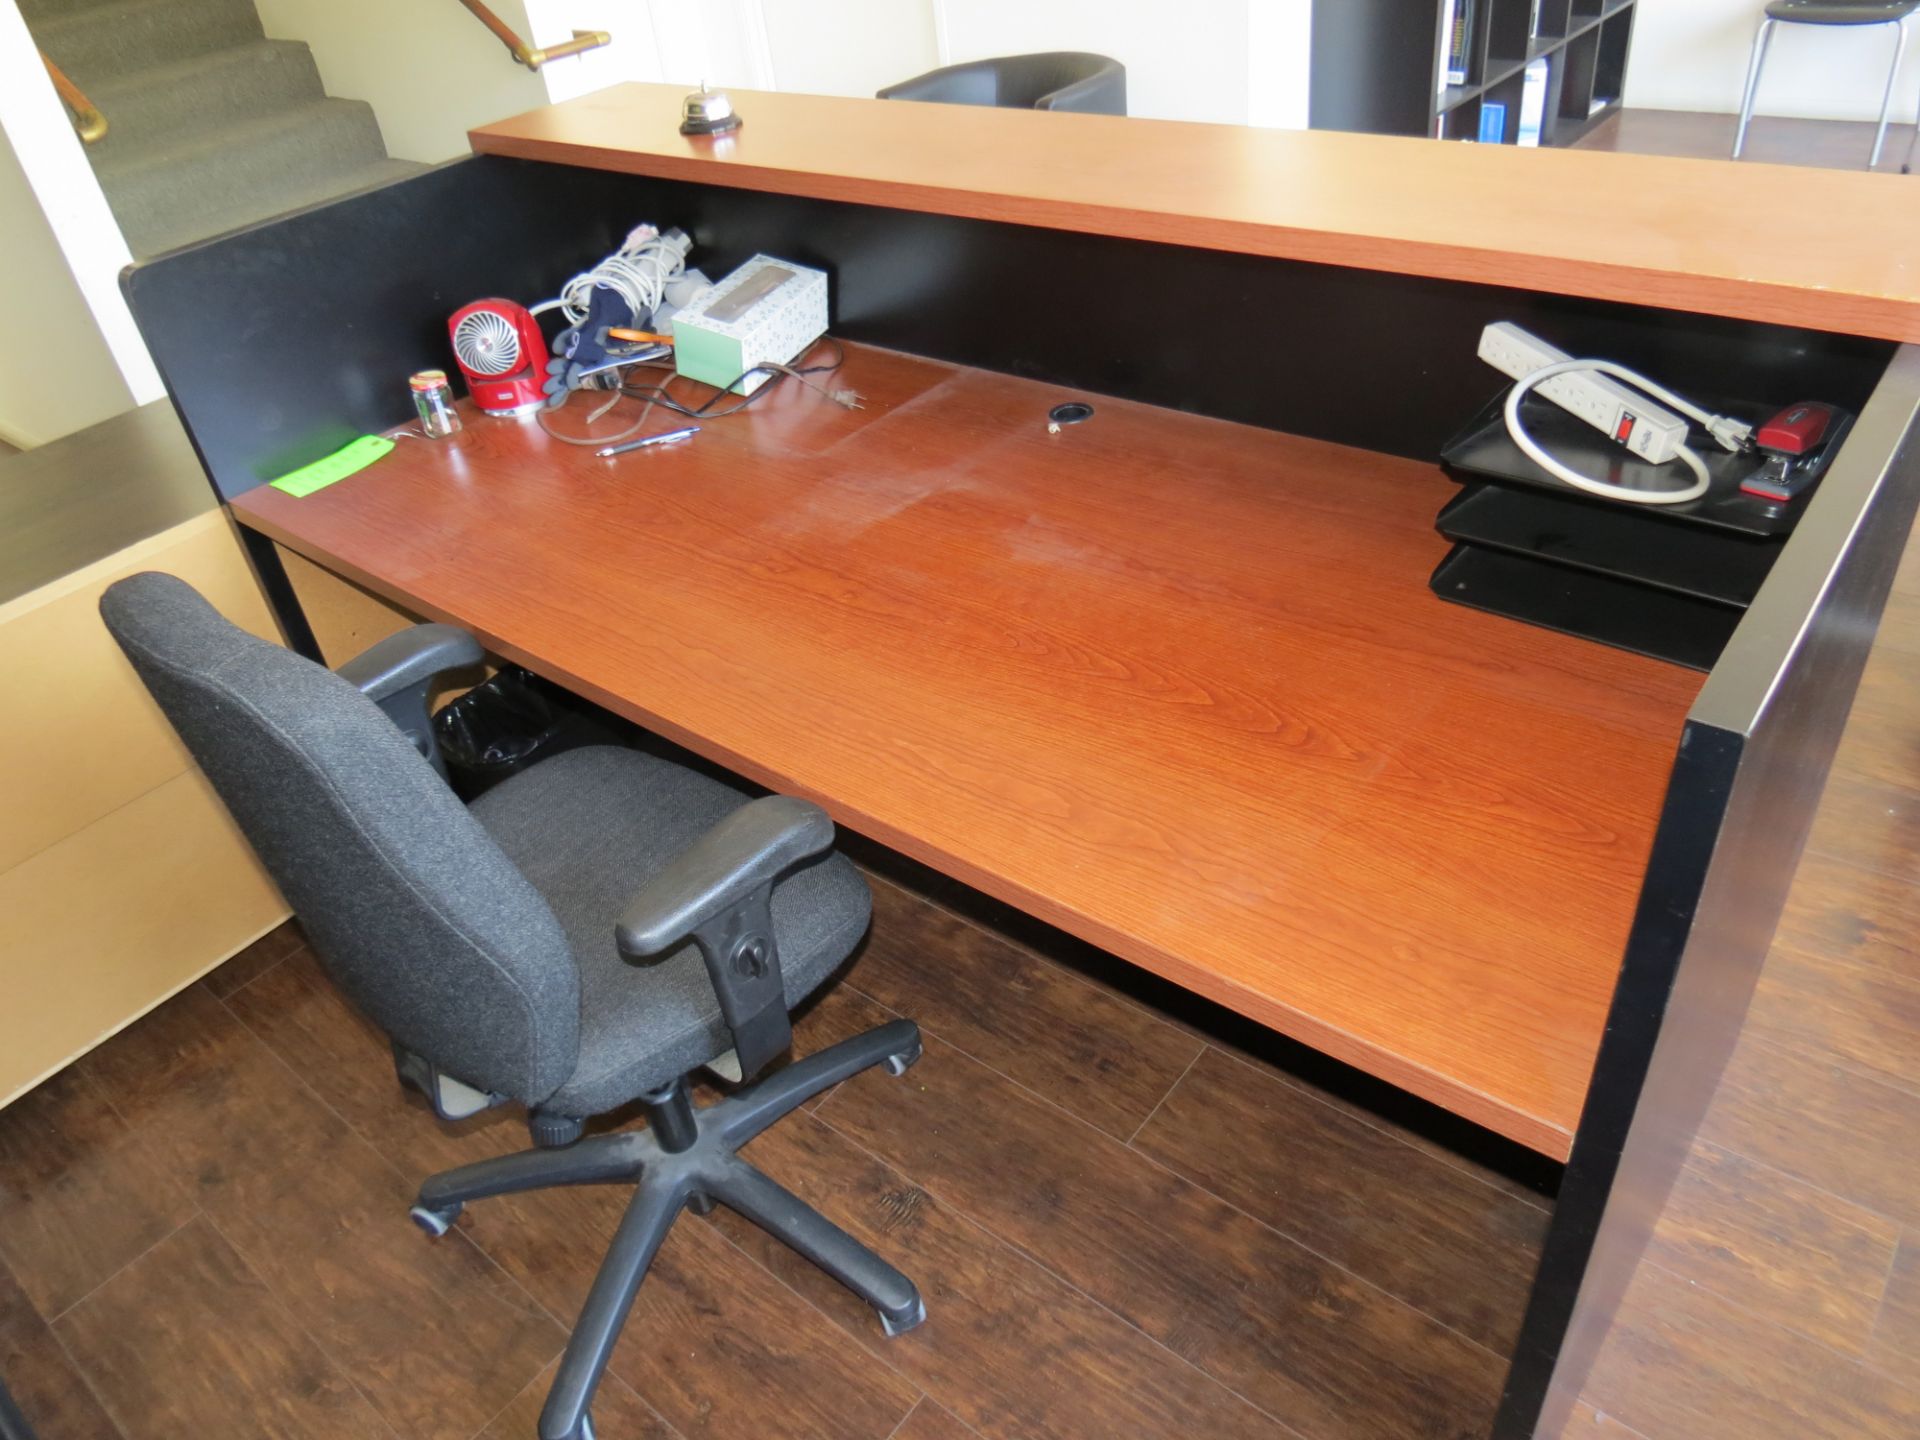 Receptionist Desk & Chair (Subject to Delivery Date) - Image 2 of 2